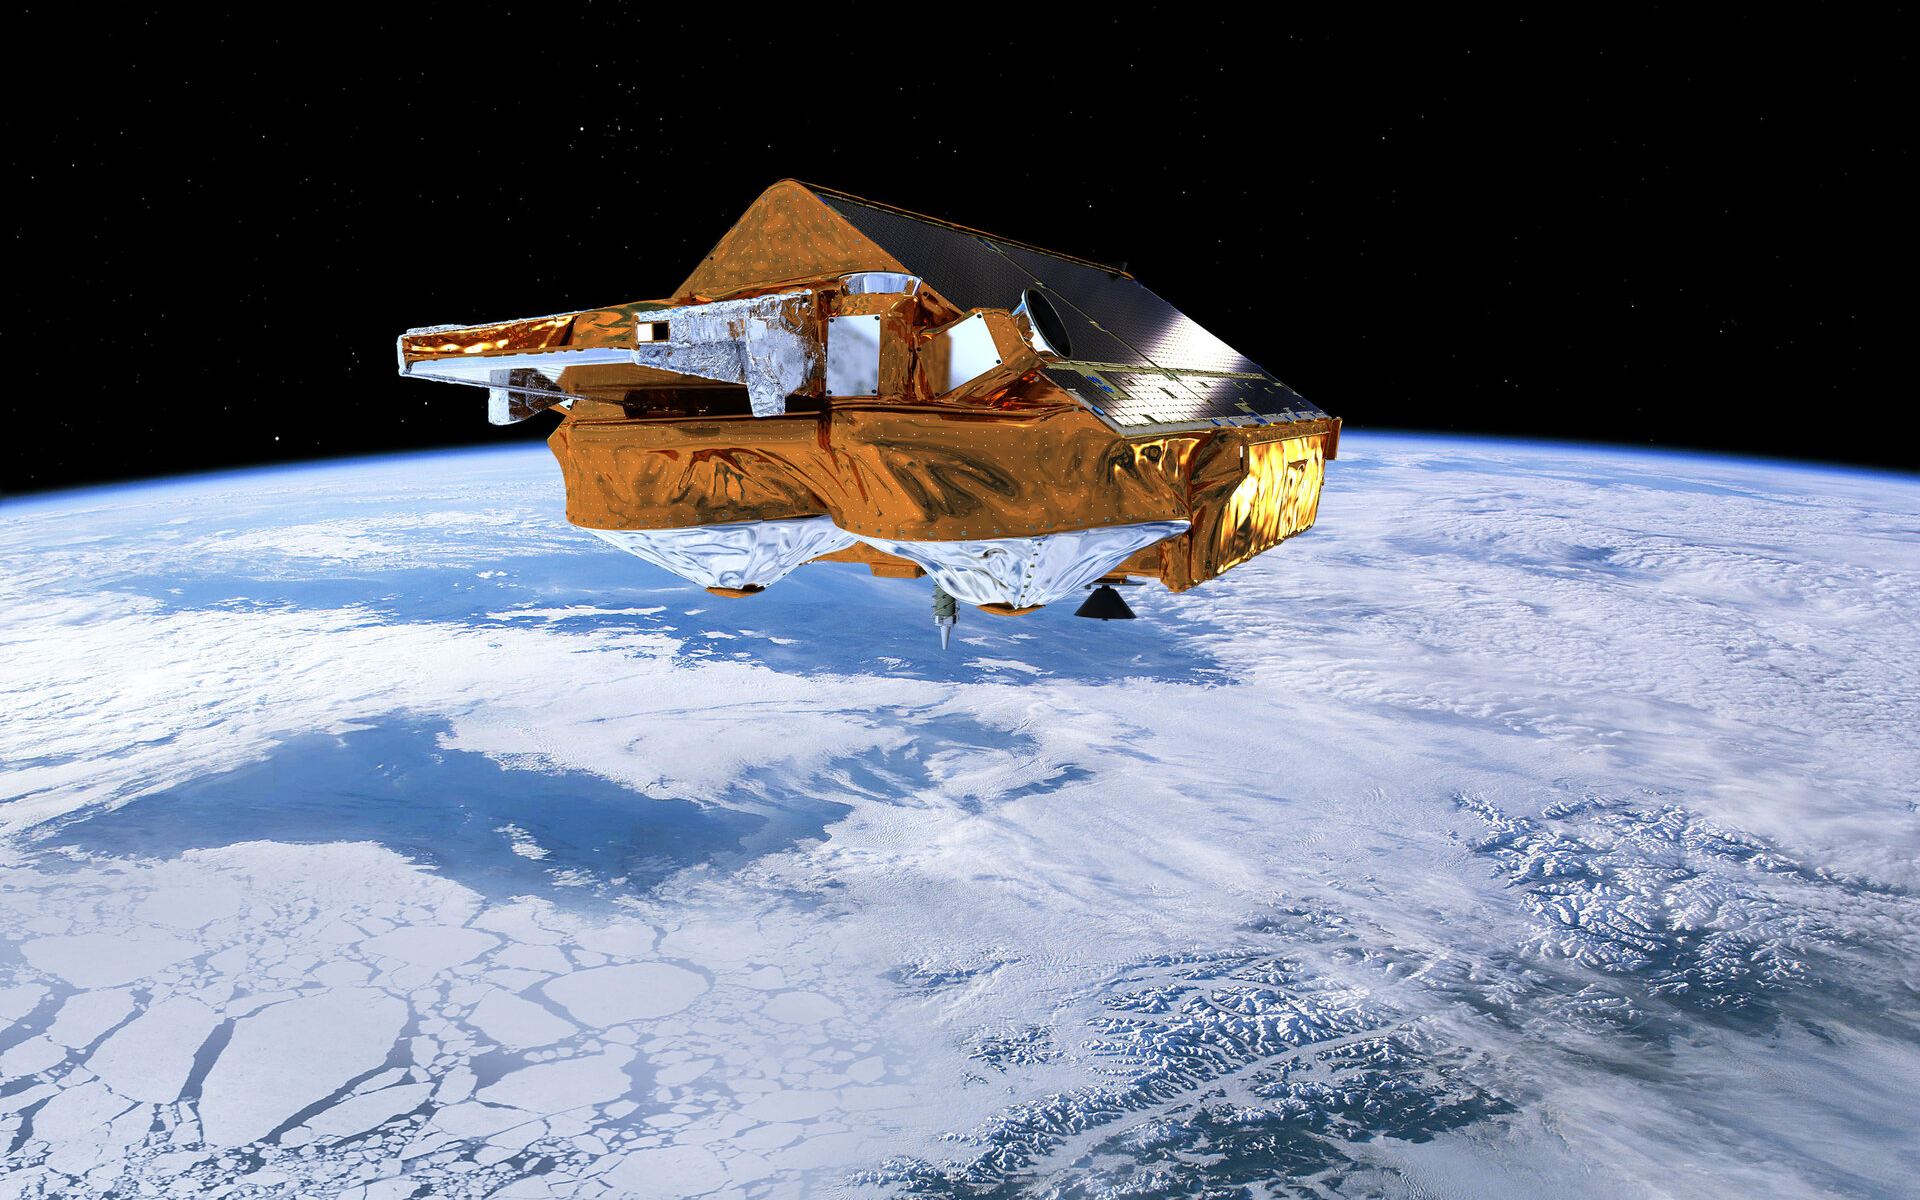 ESA’s Earth Explorer CryoSat mission is dedicated to precise monitoring of changes in the thickness of marine ice floating in the polar oceans and variations in the thickness of the vast ice sheets that blanket Greenland and Antarctica. Its data are being used to measure ice loss in glaciers. Courtesy ESA/AOES Medialab